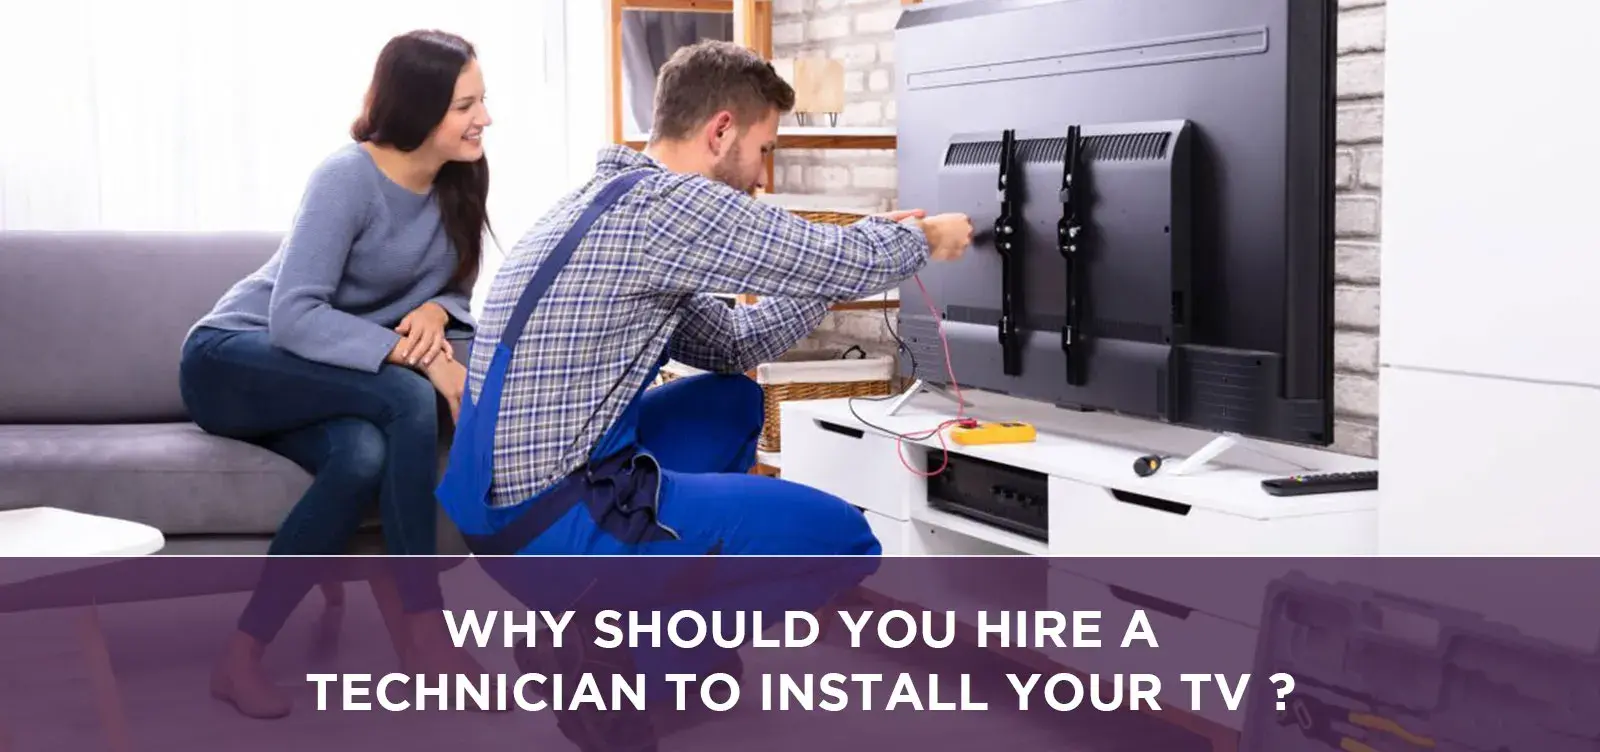 why should you hire a technician to install your tv?